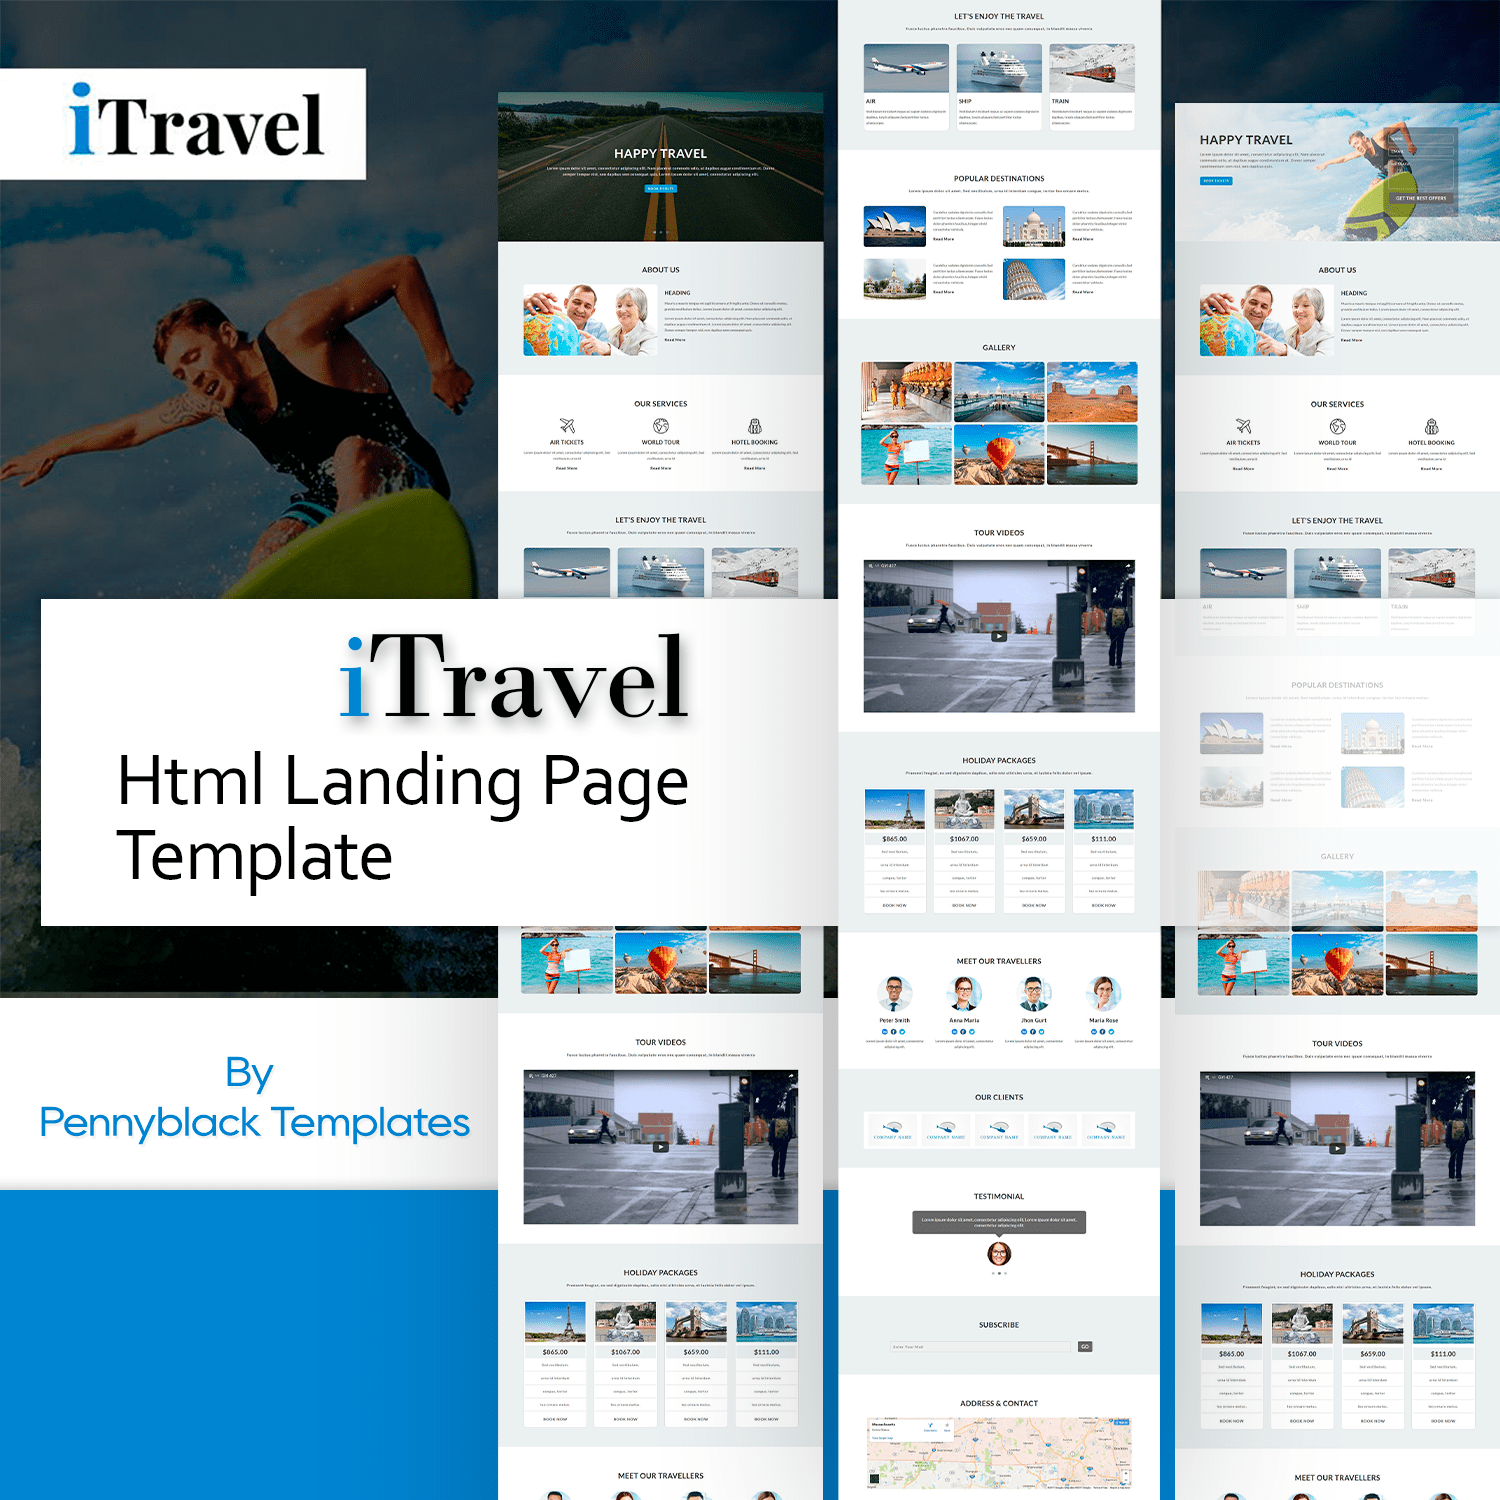 iTravel - Html Landing Page Template cover.